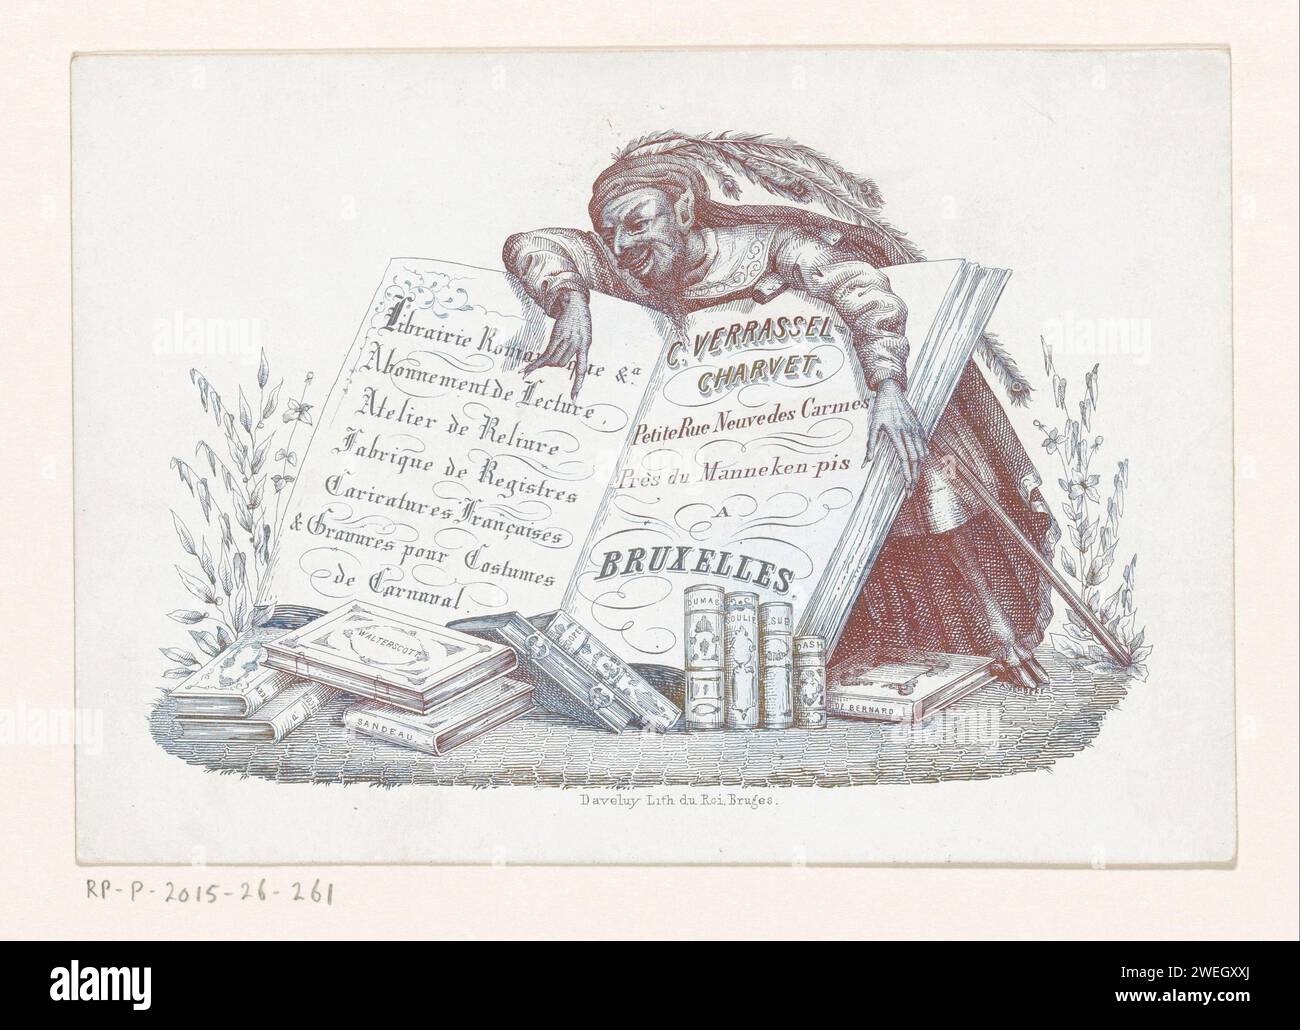 Business card from Boekhandel C. Verrassel -Charvet in Brussels, Before 1842 - 1894 print. porcelain card A open book, held up by a satyr with a beret with peacock springs and a stick. There are several books on the ground, among others Walter Scott, Dumas and Sandeau. According to the advertisement, customers can go to the bookstore for novels, subscriptions, having books binding, cash books, caricature prints and prints for carnival costumes.  .  book-shop, bookseller. satyr(s) (in general). book Brussels Stock Photo